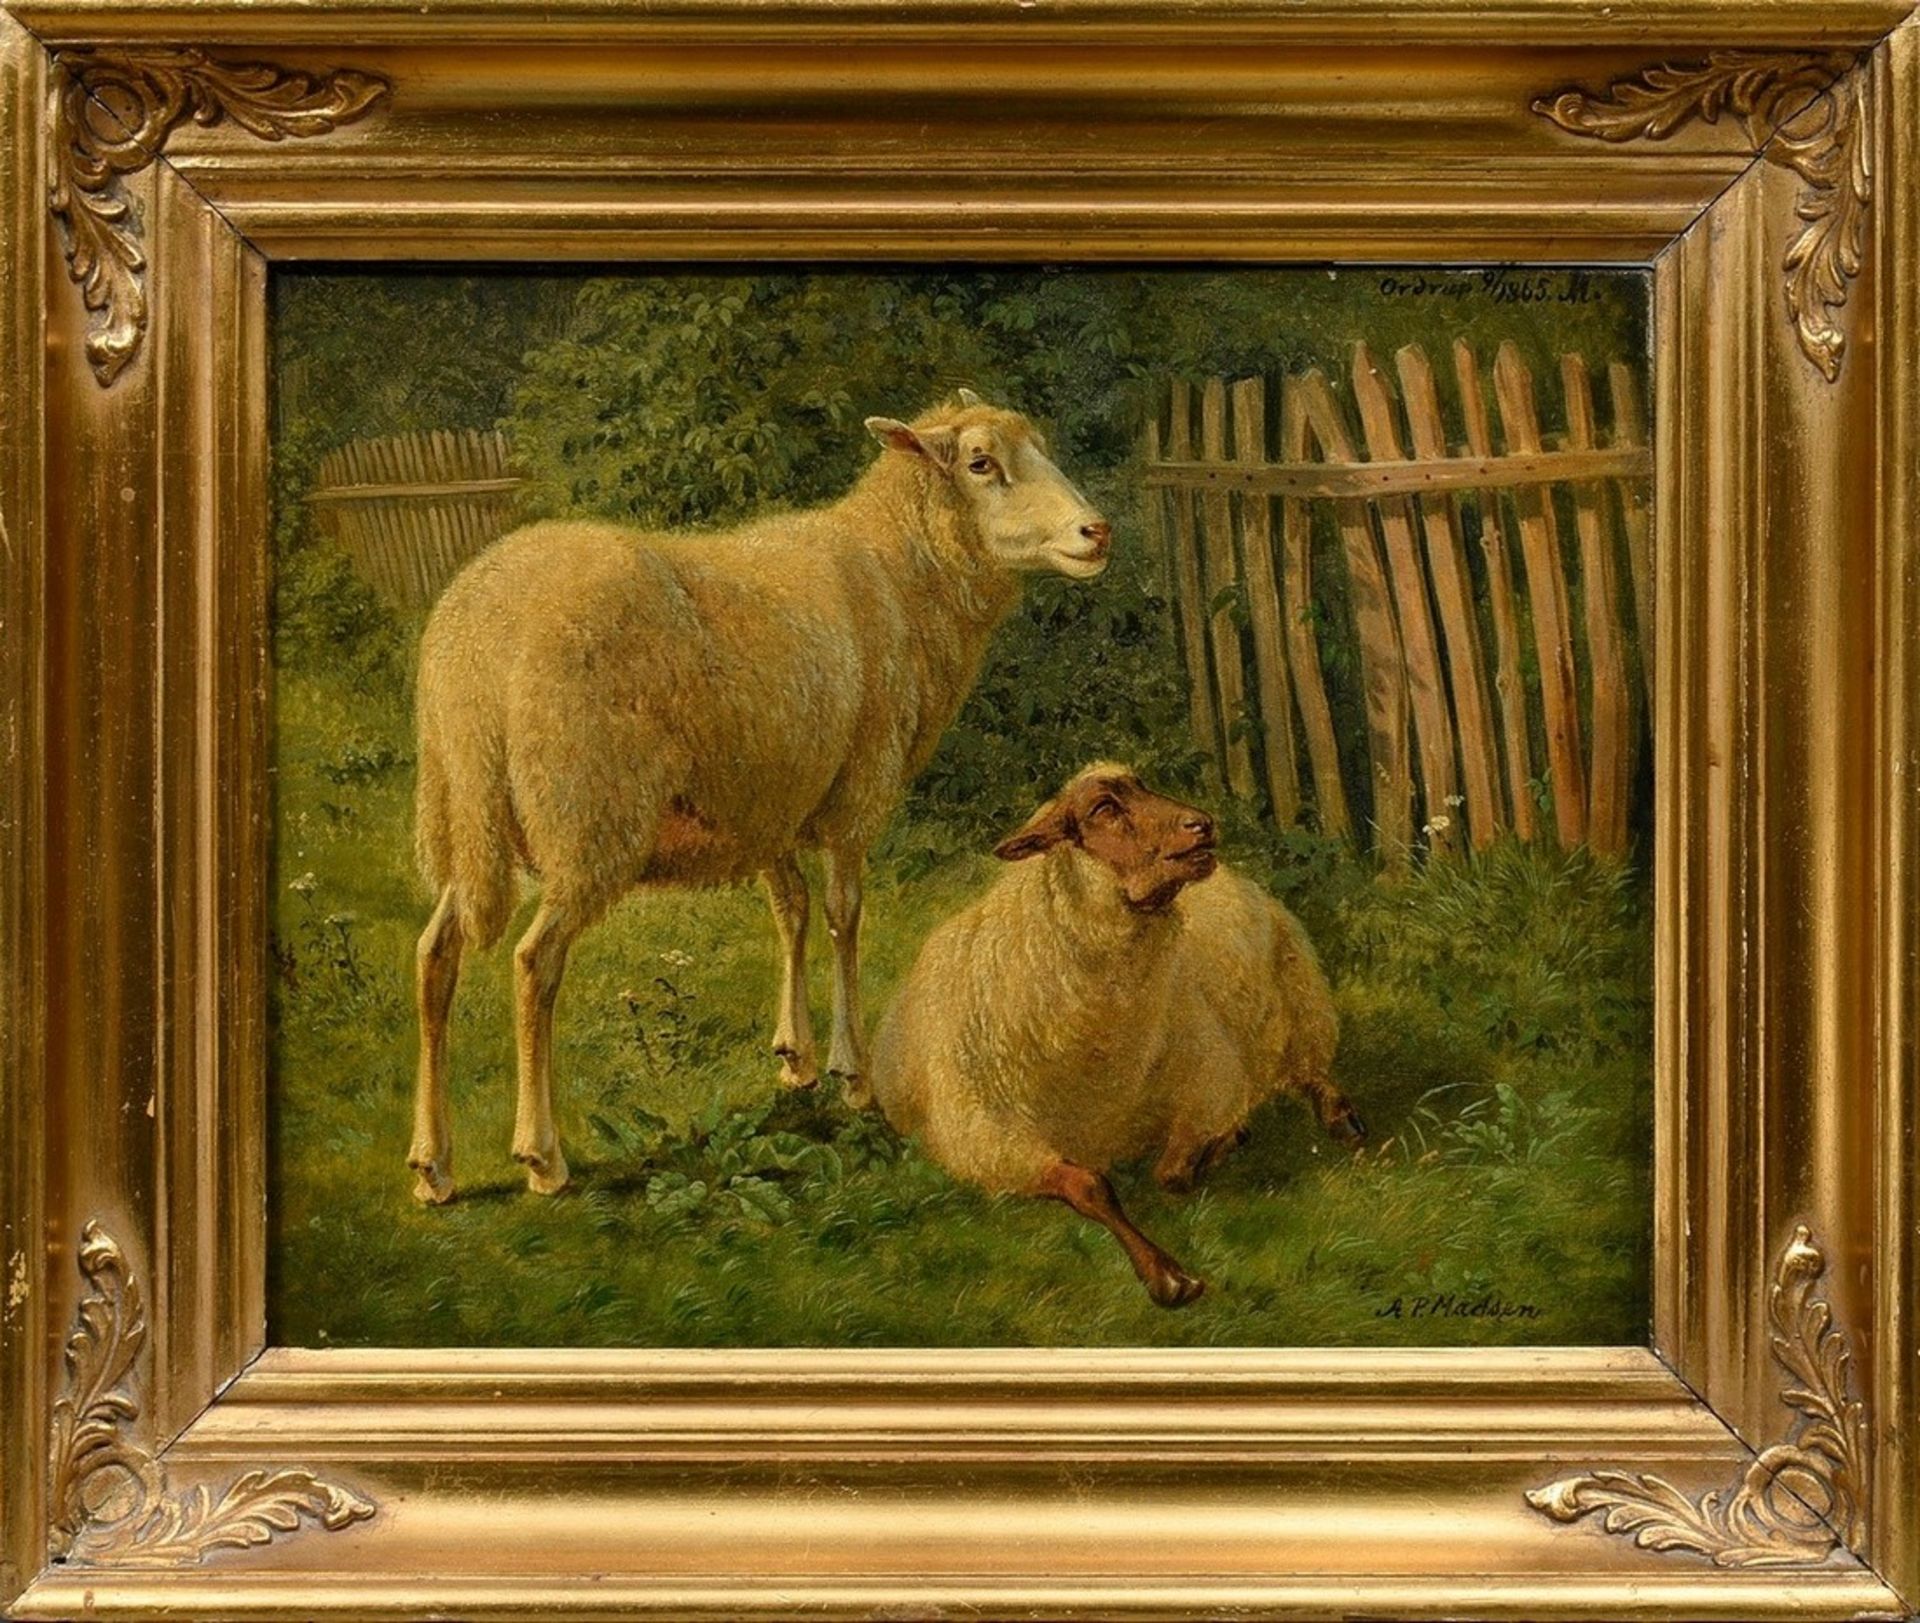 Madsen, Andreas Peter (1822-1911) "Landscape with Sheep" 1865, oil/canvas, sign. lower right, dat./ - Image 2 of 6